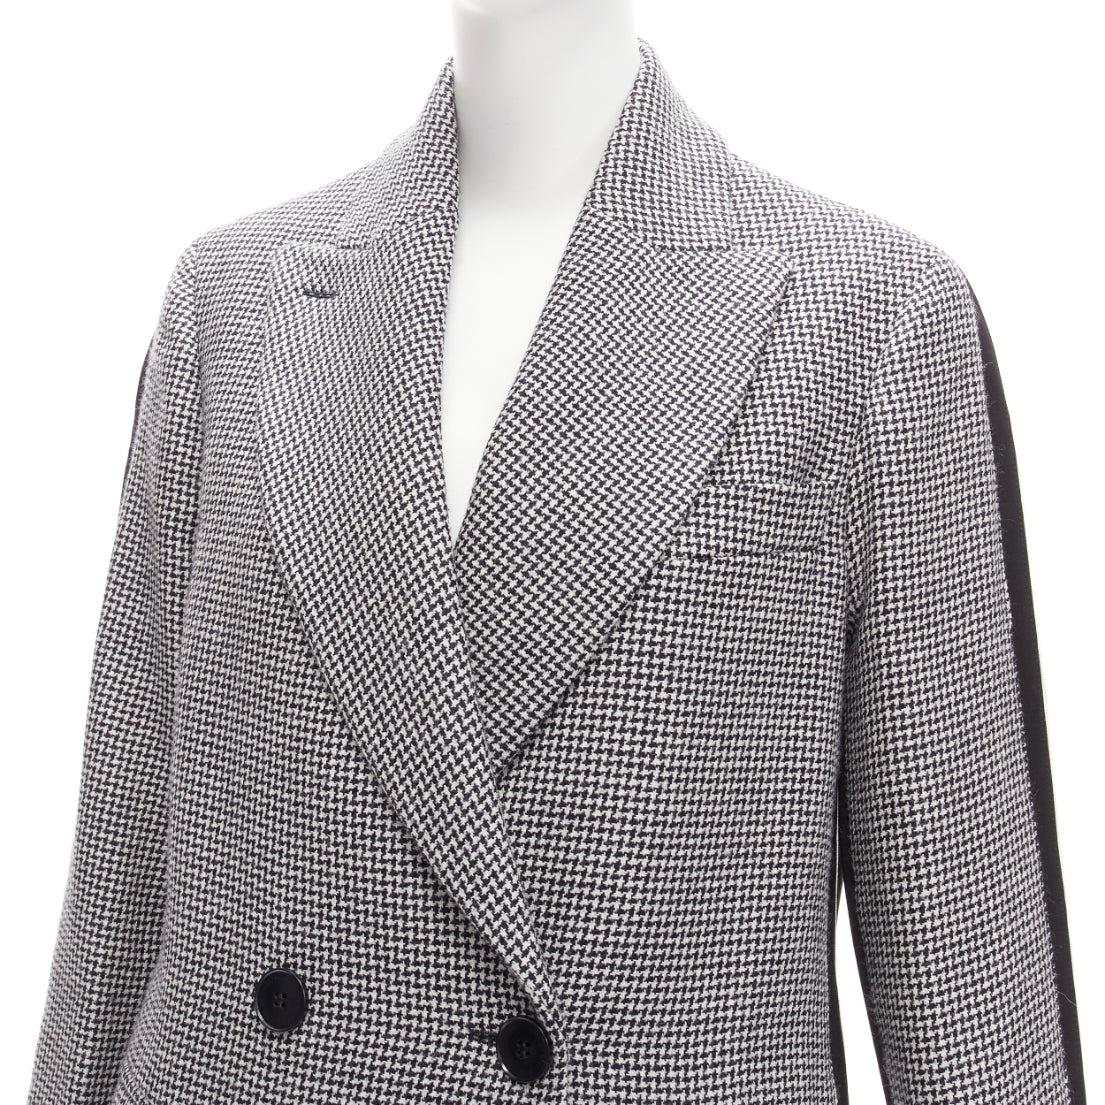 STELLA MCCARTNEY 2018 100% wool grey houndstooth bicolor tailored coat IT38 XS
Reference: NKLL/A00003
Brand: Stella McCartney
Designer: Stella McCartney
Collection: 2018
Material: Wool
Color: Black, White
Pattern: Houndstooth
Closure: Button
Lining: